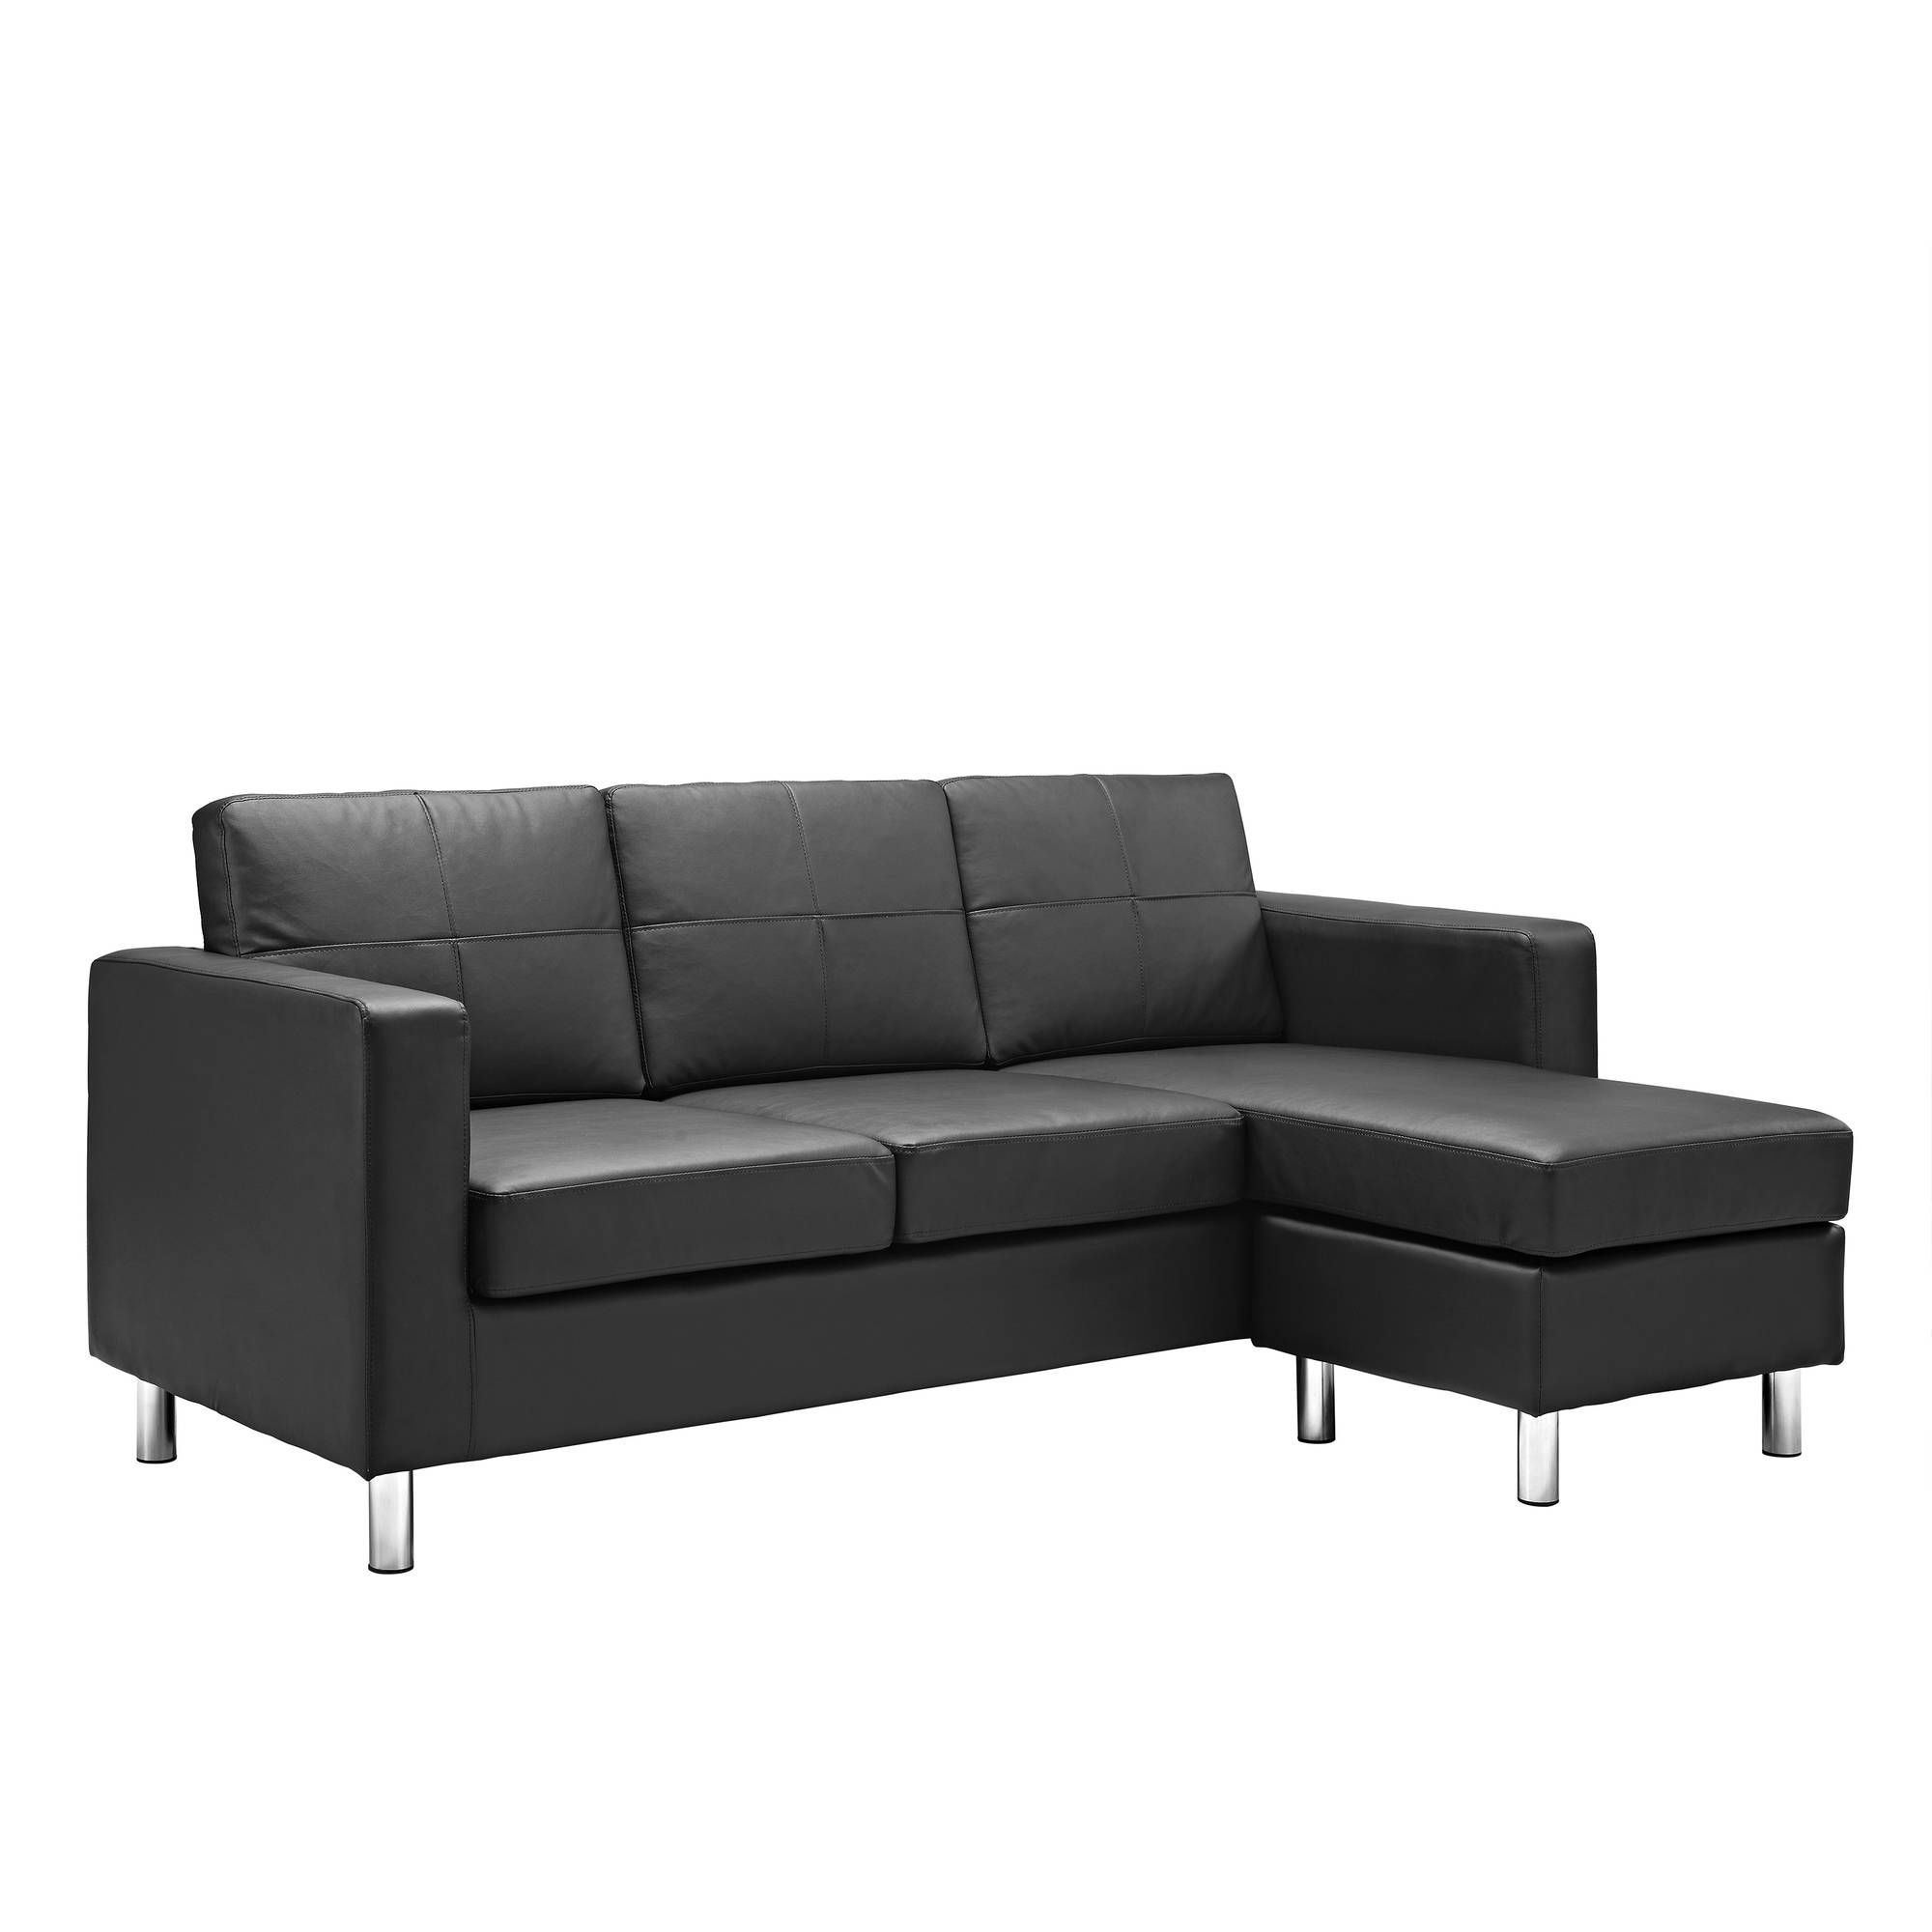 Dorel Living Small Spaces Configurable Sectional Sofa Multiple In Condo Sectional Sofas (View 3 of 15)